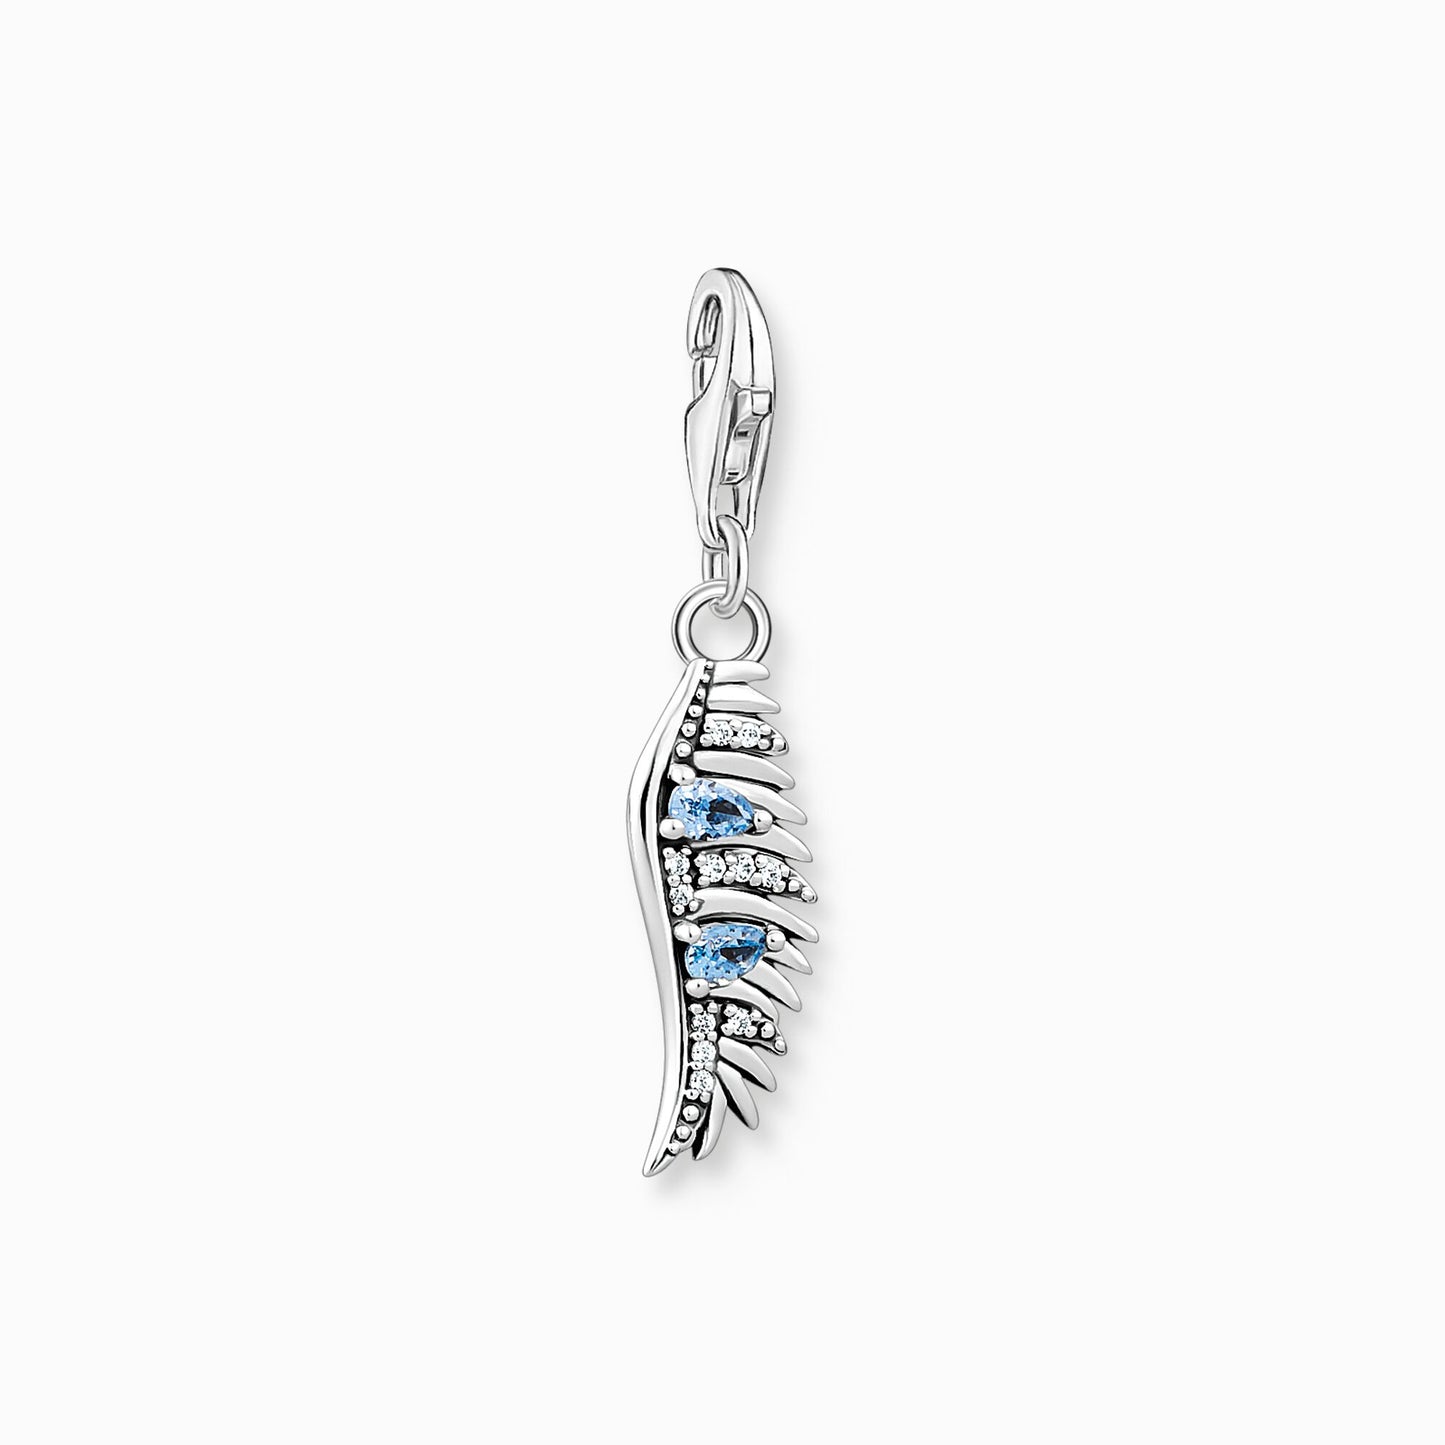 Charm pendant phoenix feather with blue stones silver